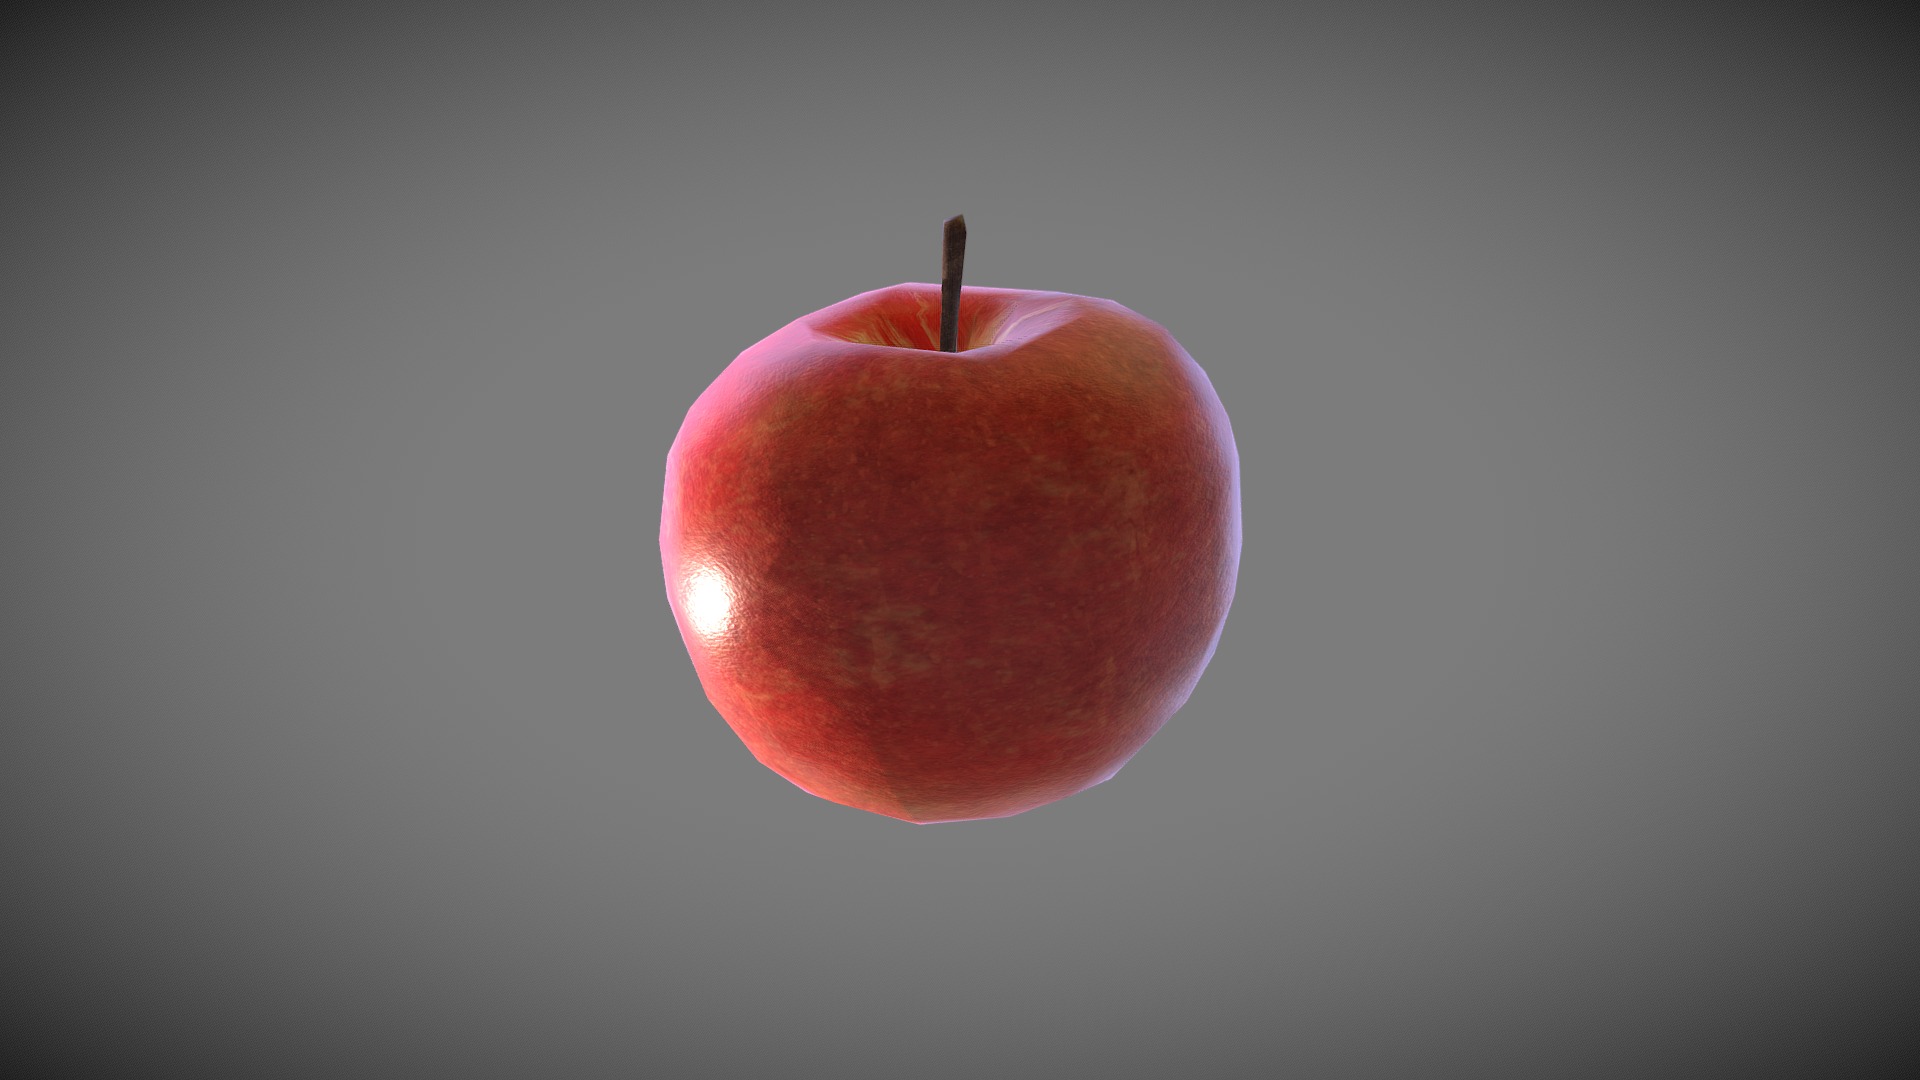 3D model Apple - This is a 3D model of the Apple. The 3D model is about a red apple on a white background.